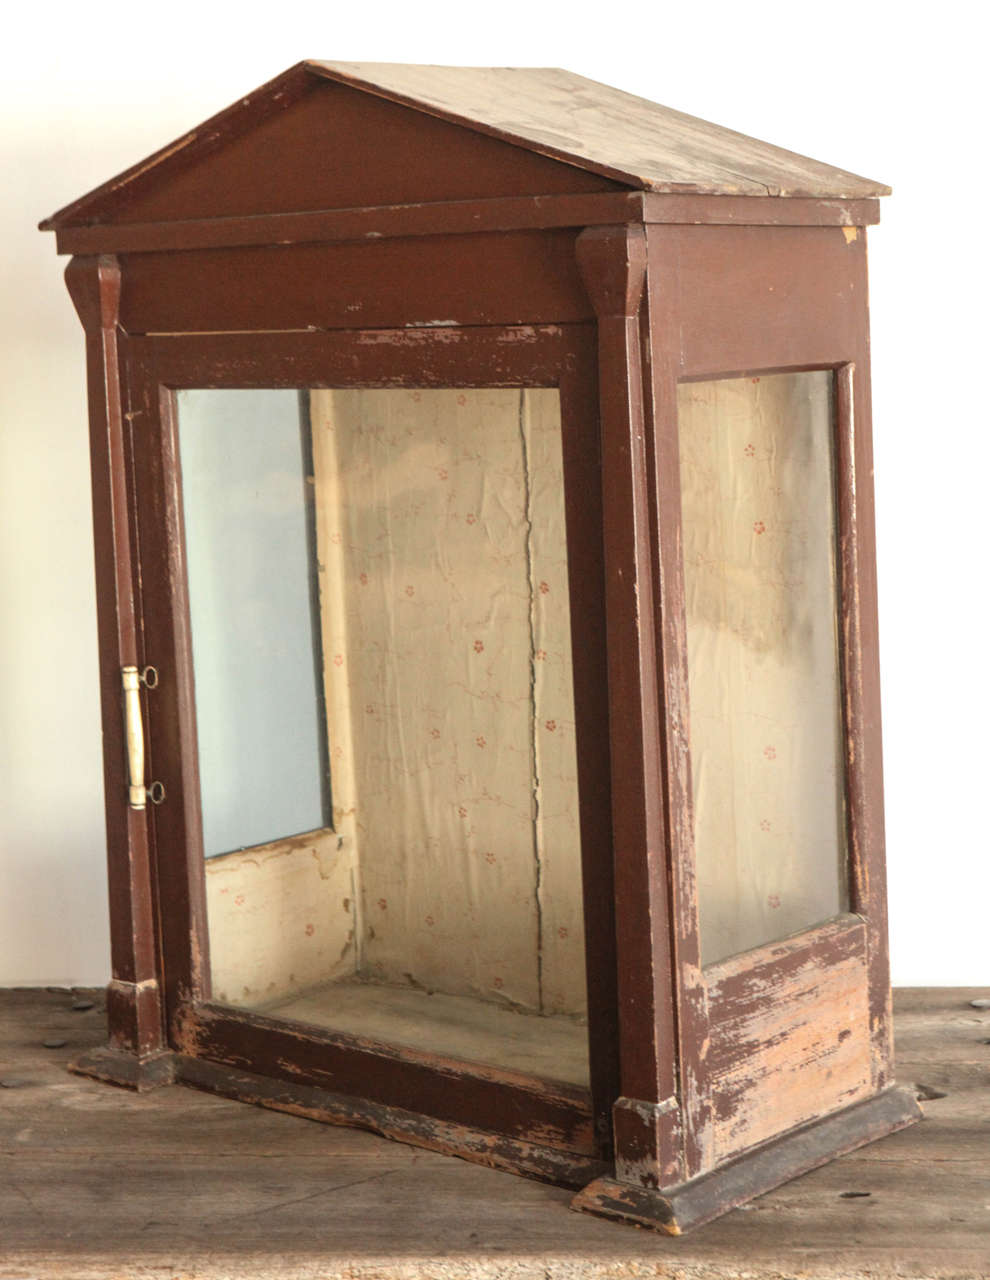 Handsome display case/ vitrine with glass swing out door and glass panels on side with remnants of original wallpaper lining.